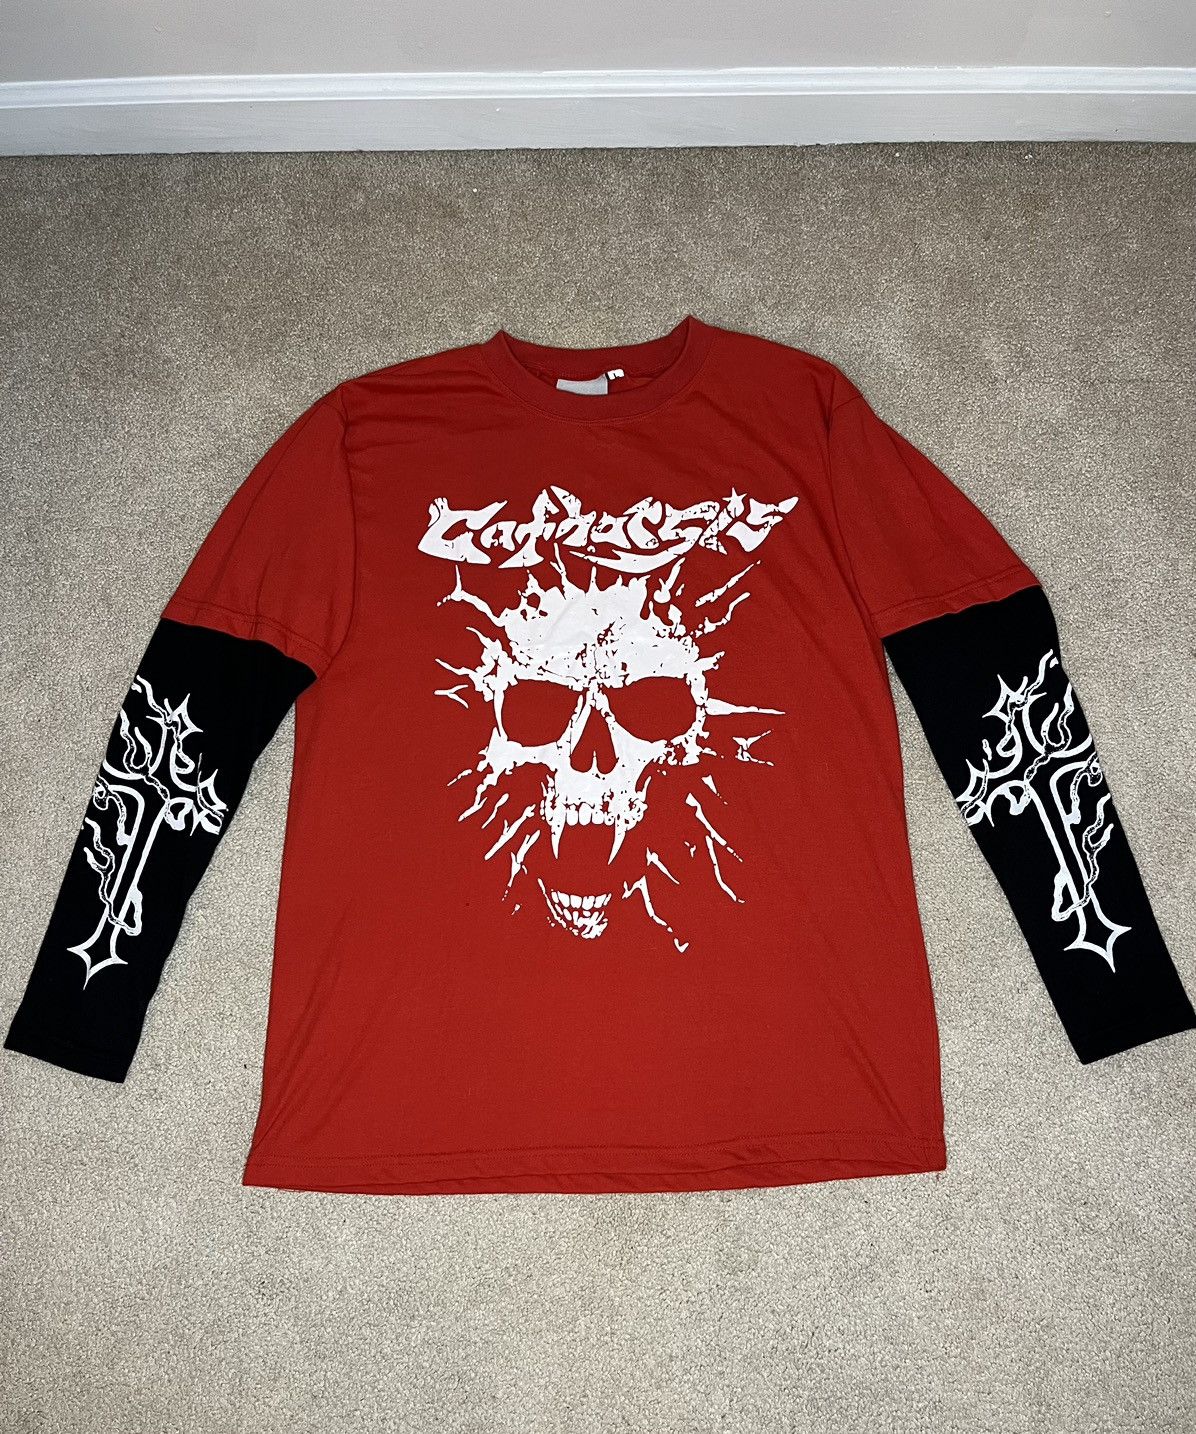 Japanese Brand Y2K Skull and Crosses Long Sleeve Shirt Size US L / EU 52-54 / 3 - 2 Preview